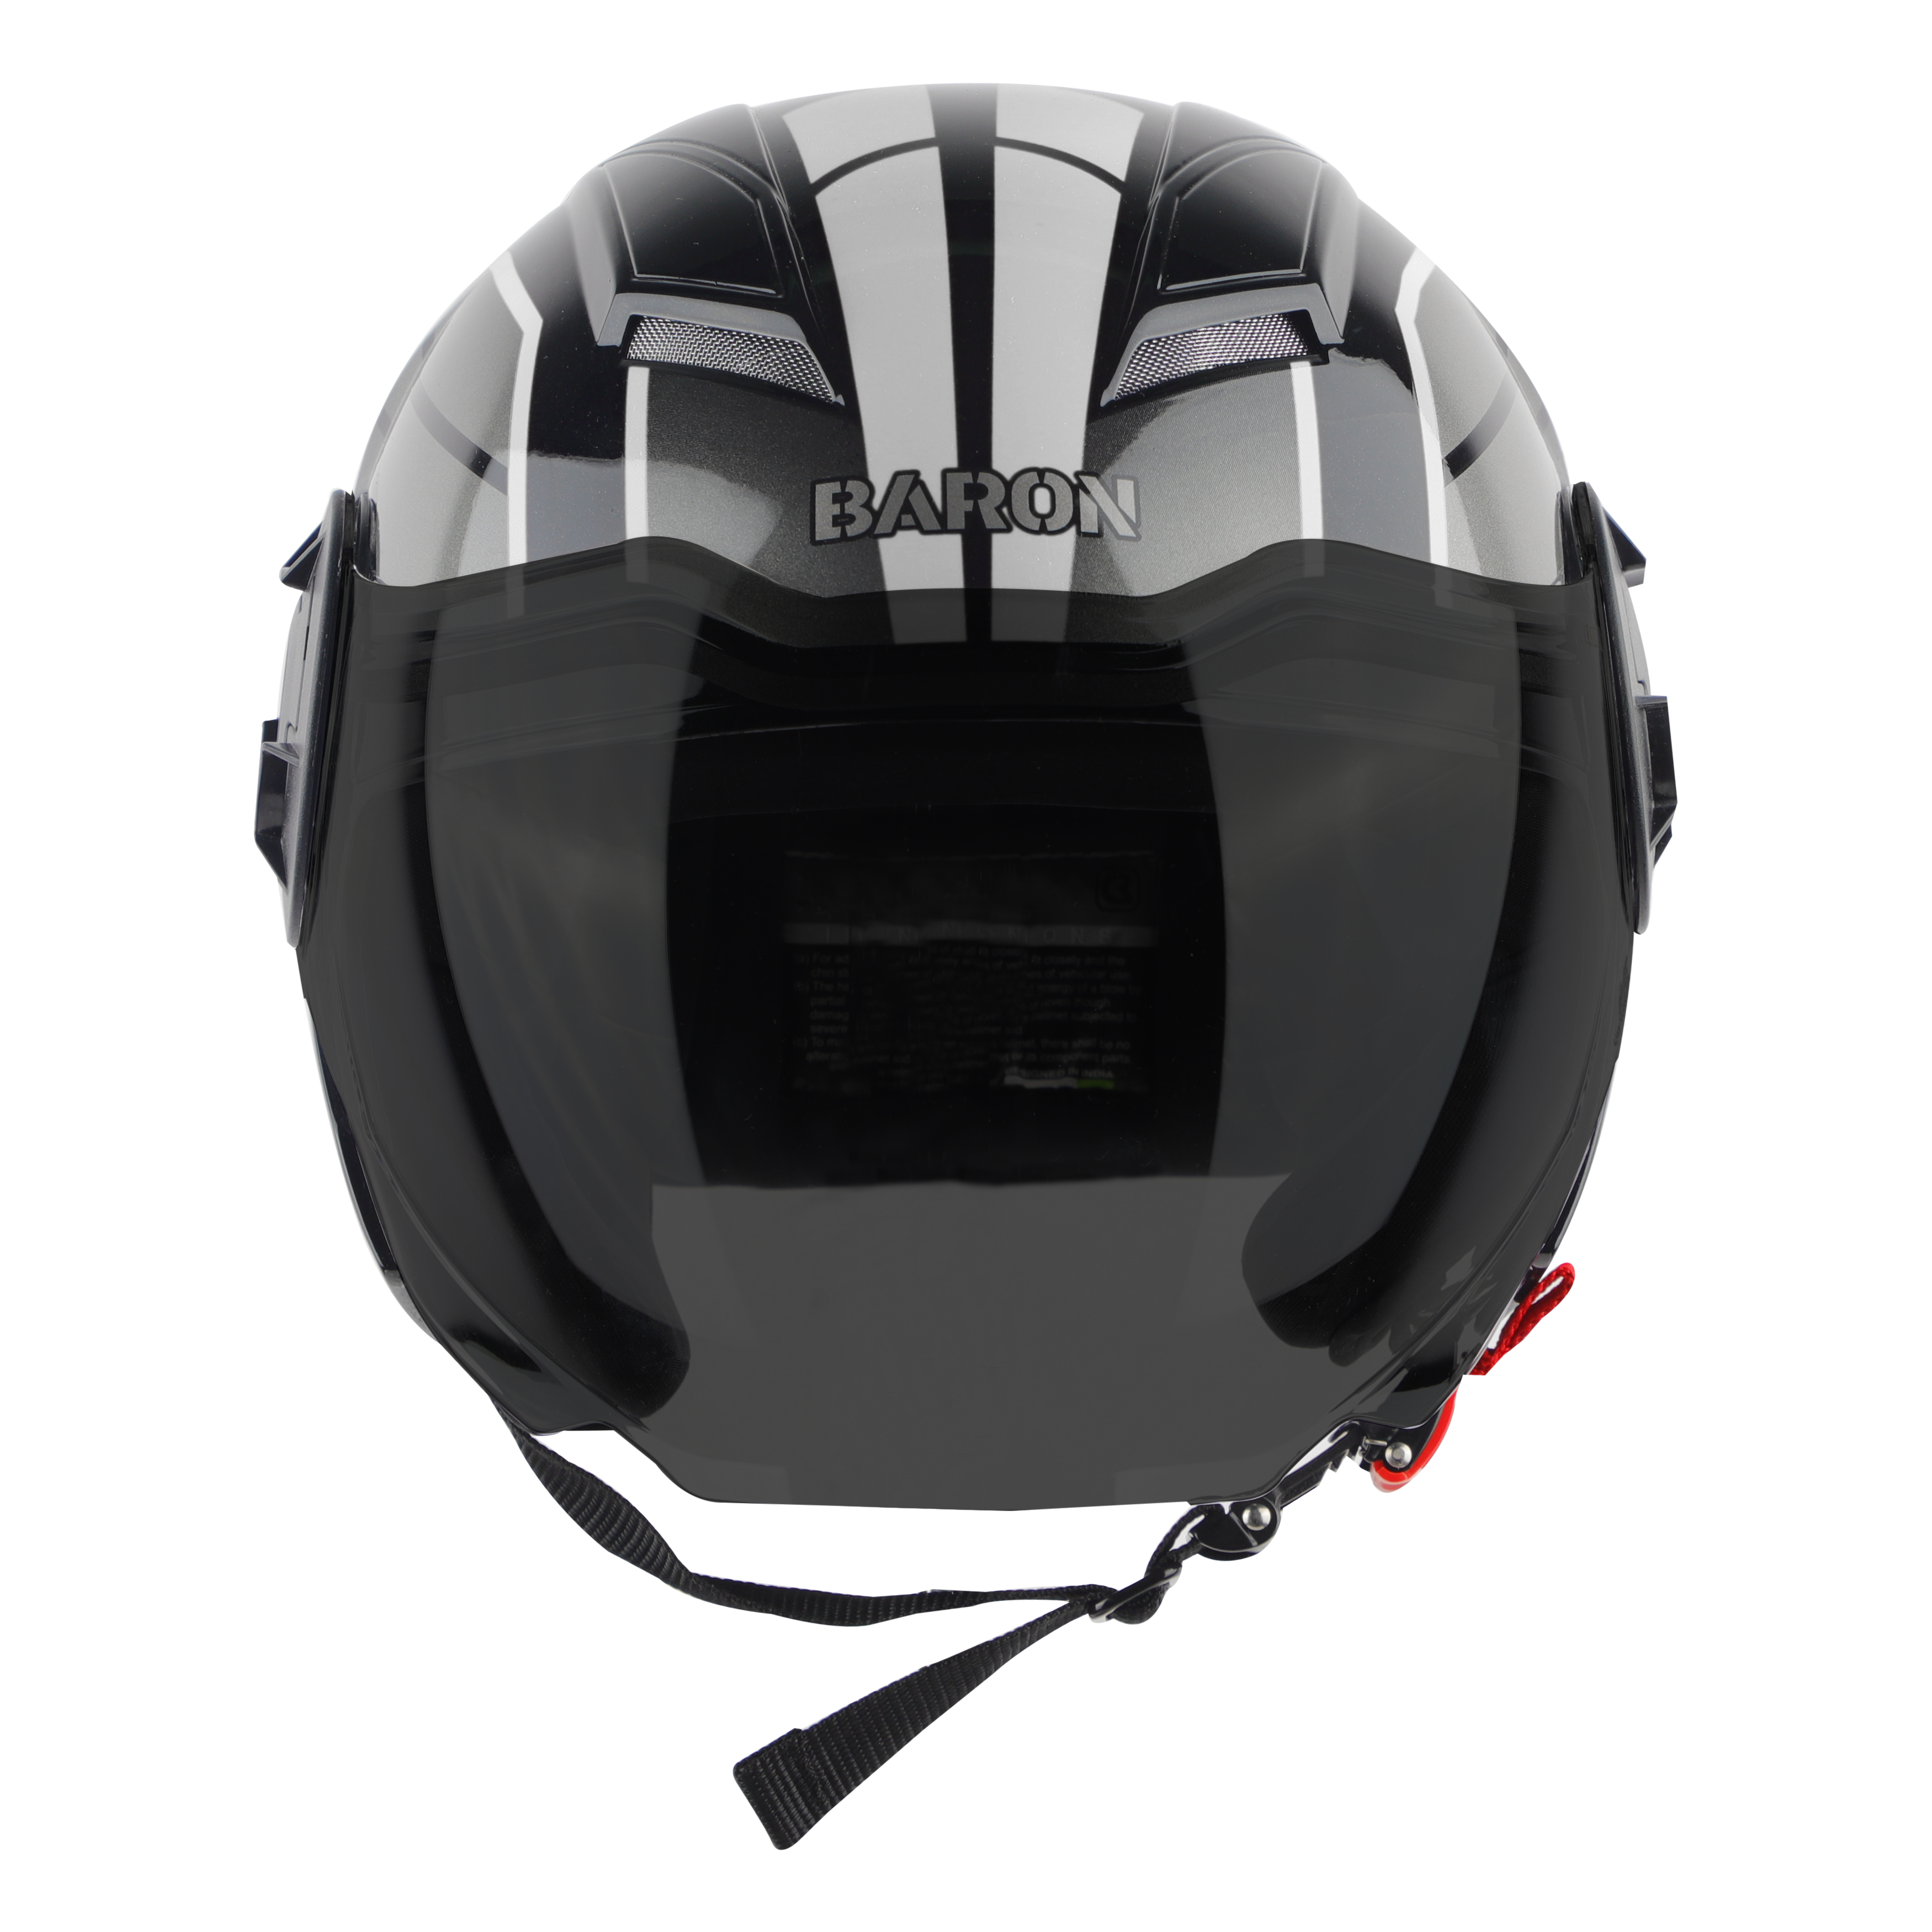 Steelbird SBH-31 Baron ISI Certified Open Face Helmet For Men And Women (Glossy Black Grey With Smoke Visor)